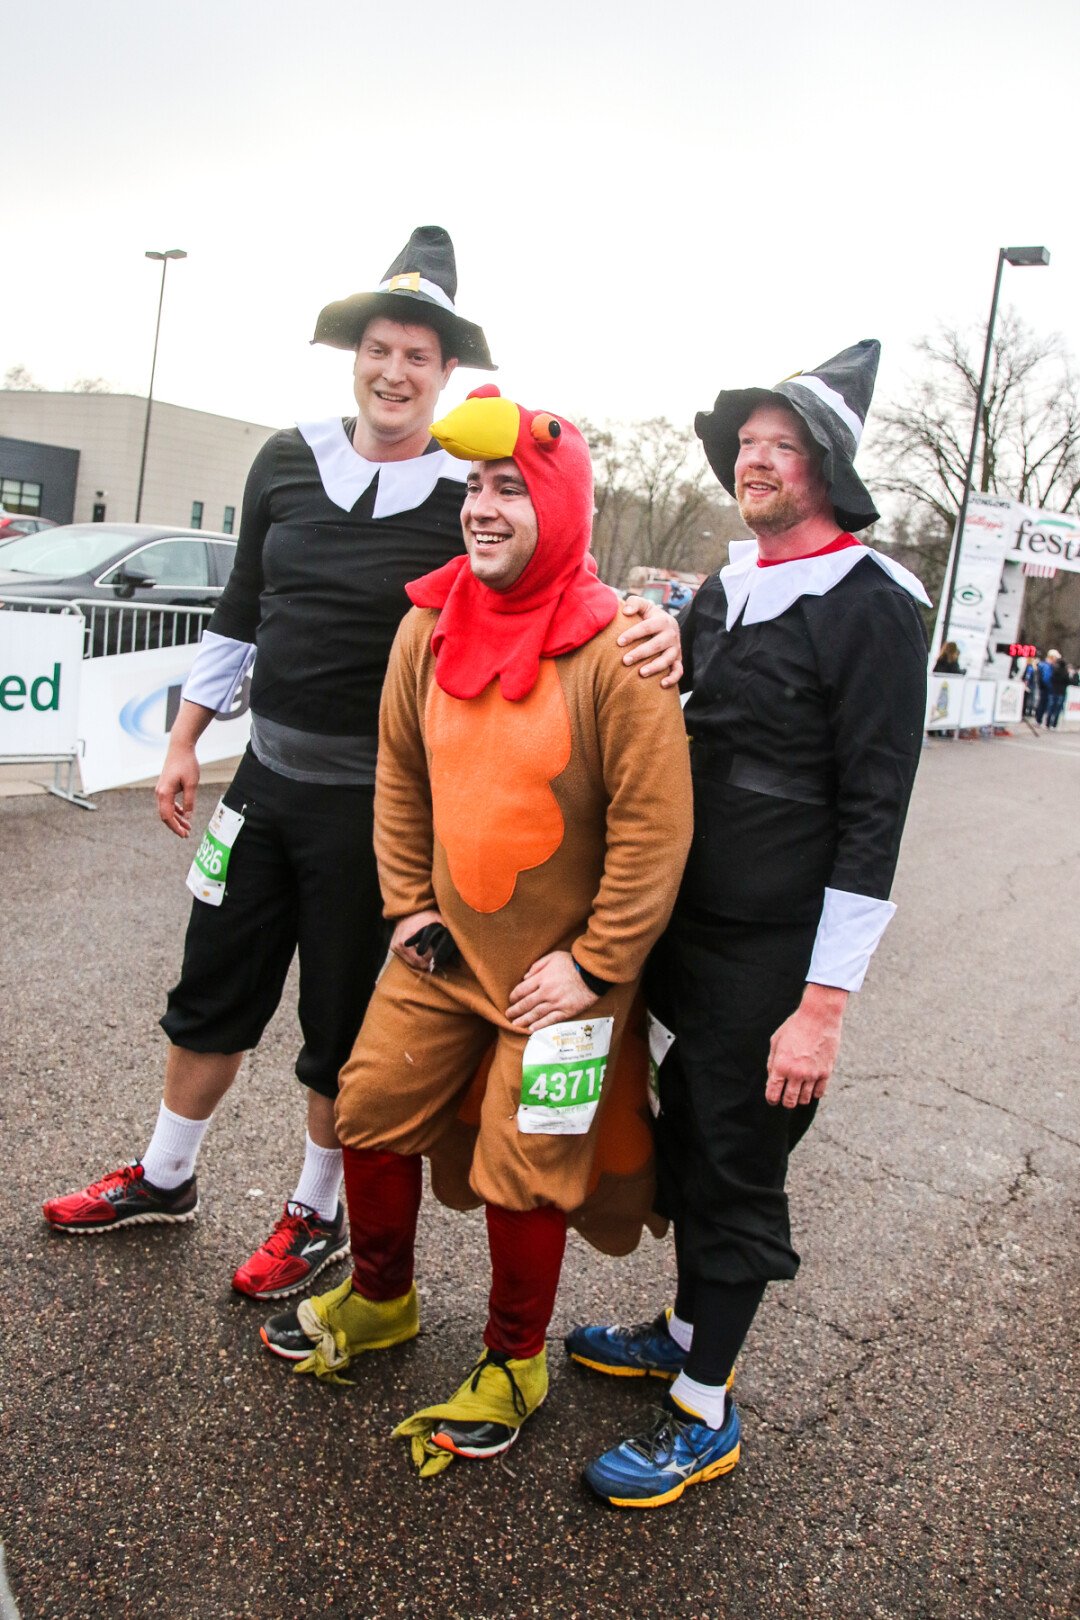 HOT TO TROT. Costumed fun was on the menu at the annual Festival Foods Turkey Trot on Nov. 24 in Eau Claire. The run benefits the YMCA and the Boys and Girls Club of the Greater Chippewa Valley.